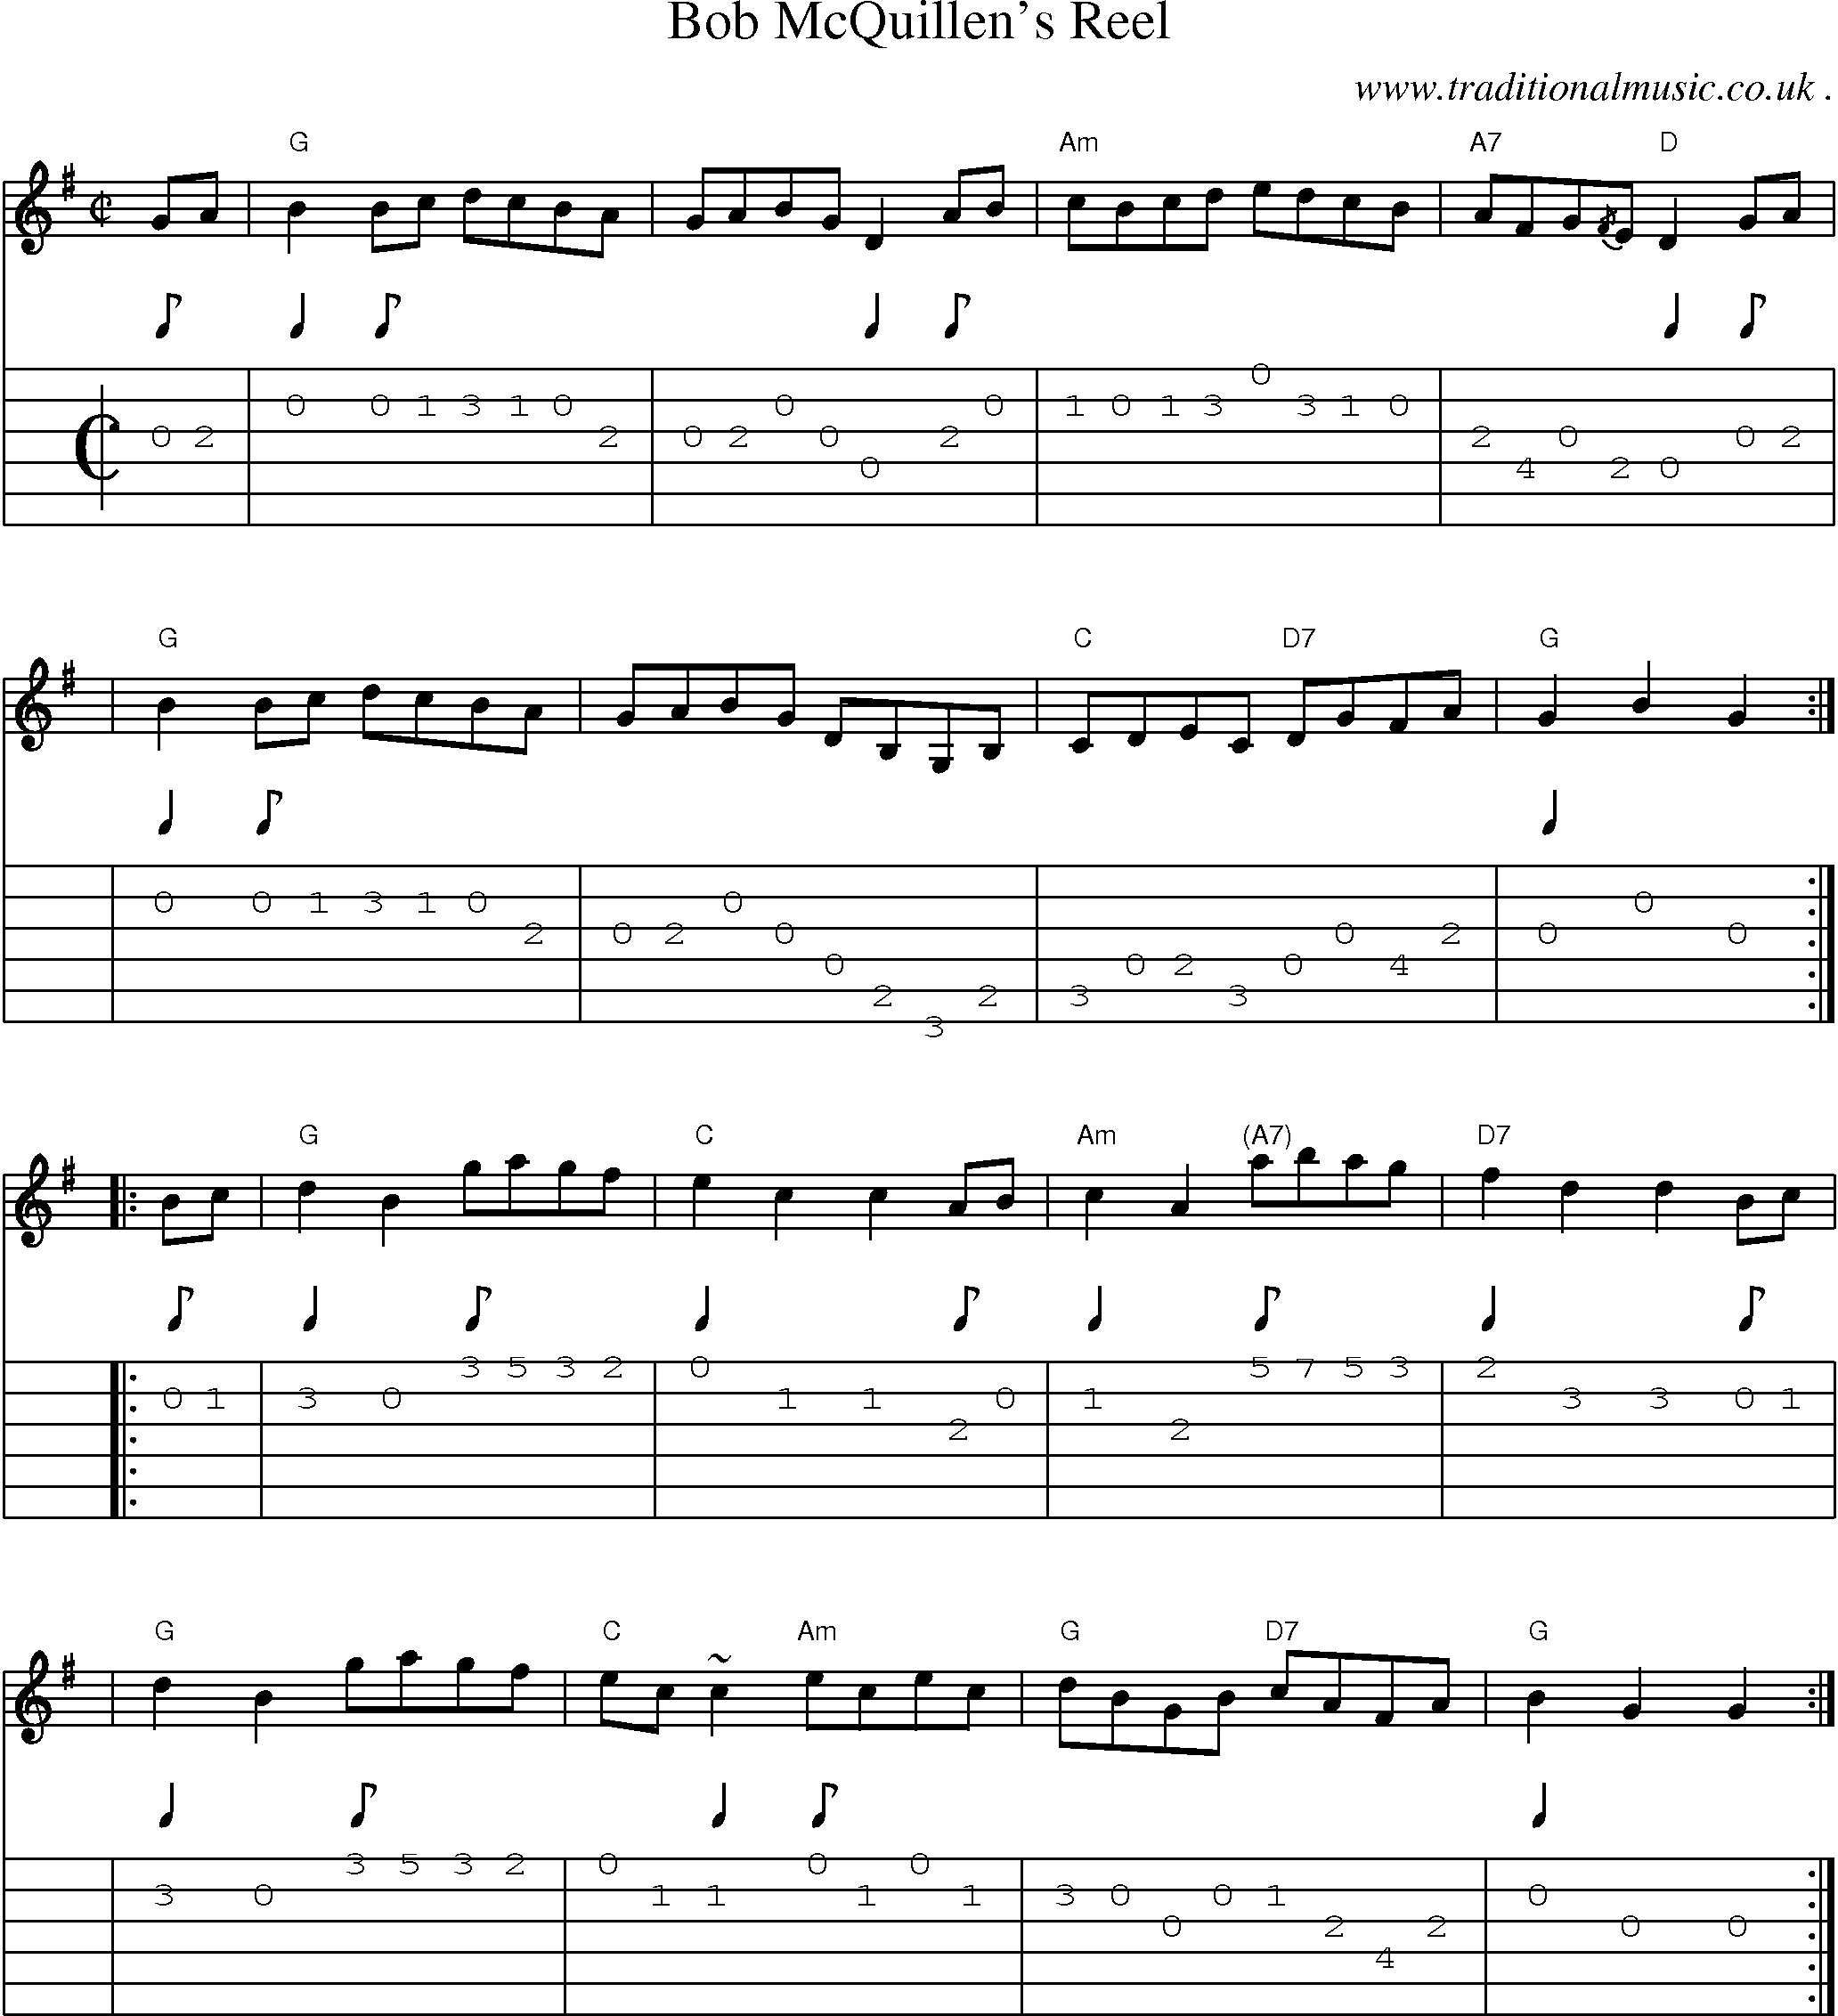 Sheet-music  score, Chords and Guitar Tabs for Bob Mcquillens Reel